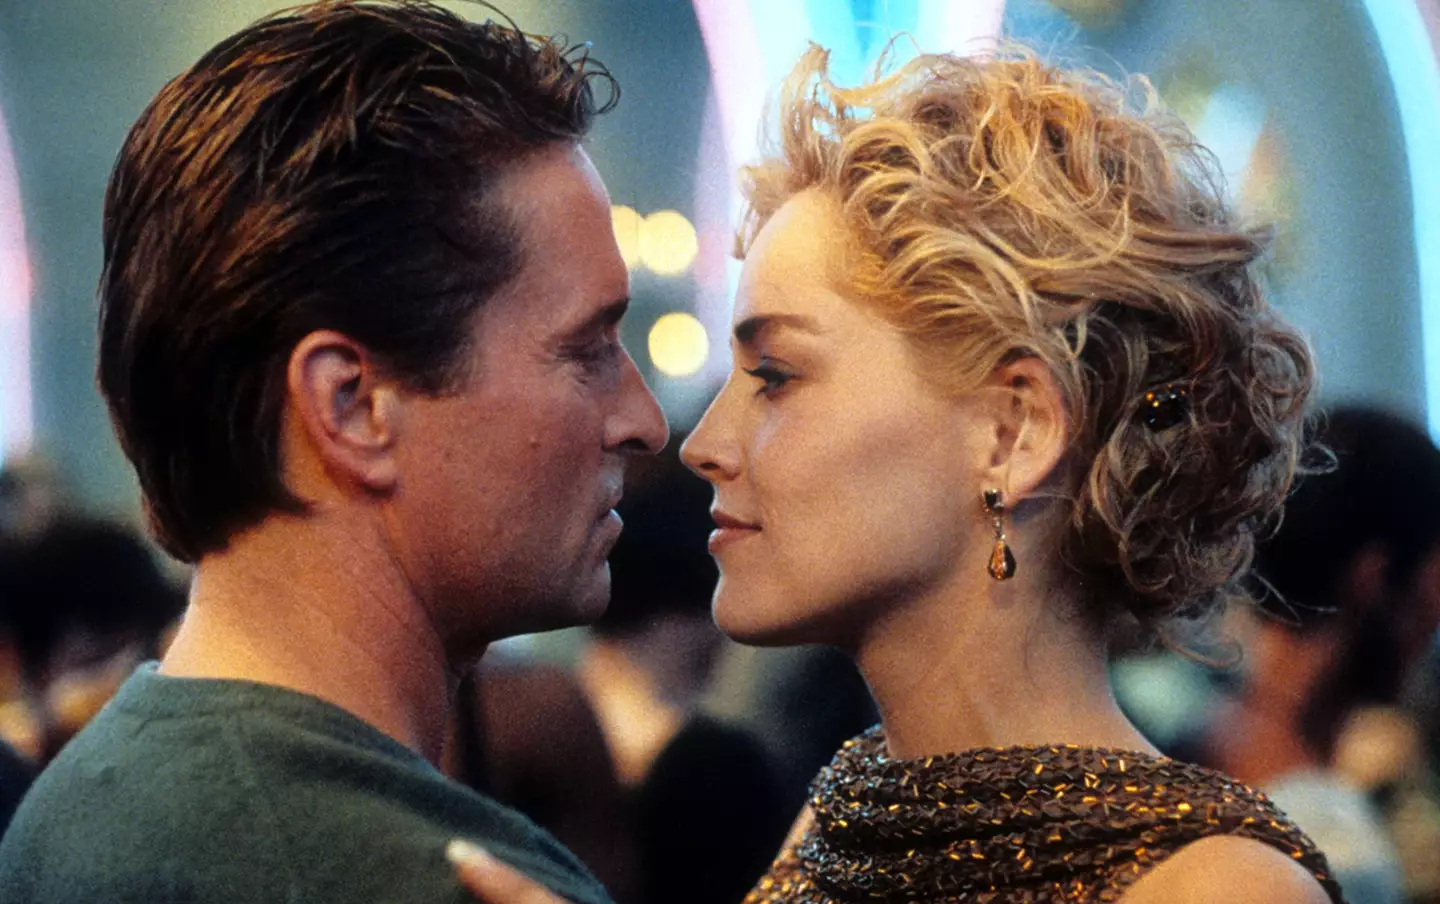 Sharon Stone says Michael Douglas made a massive $13 million more than her for the movie.